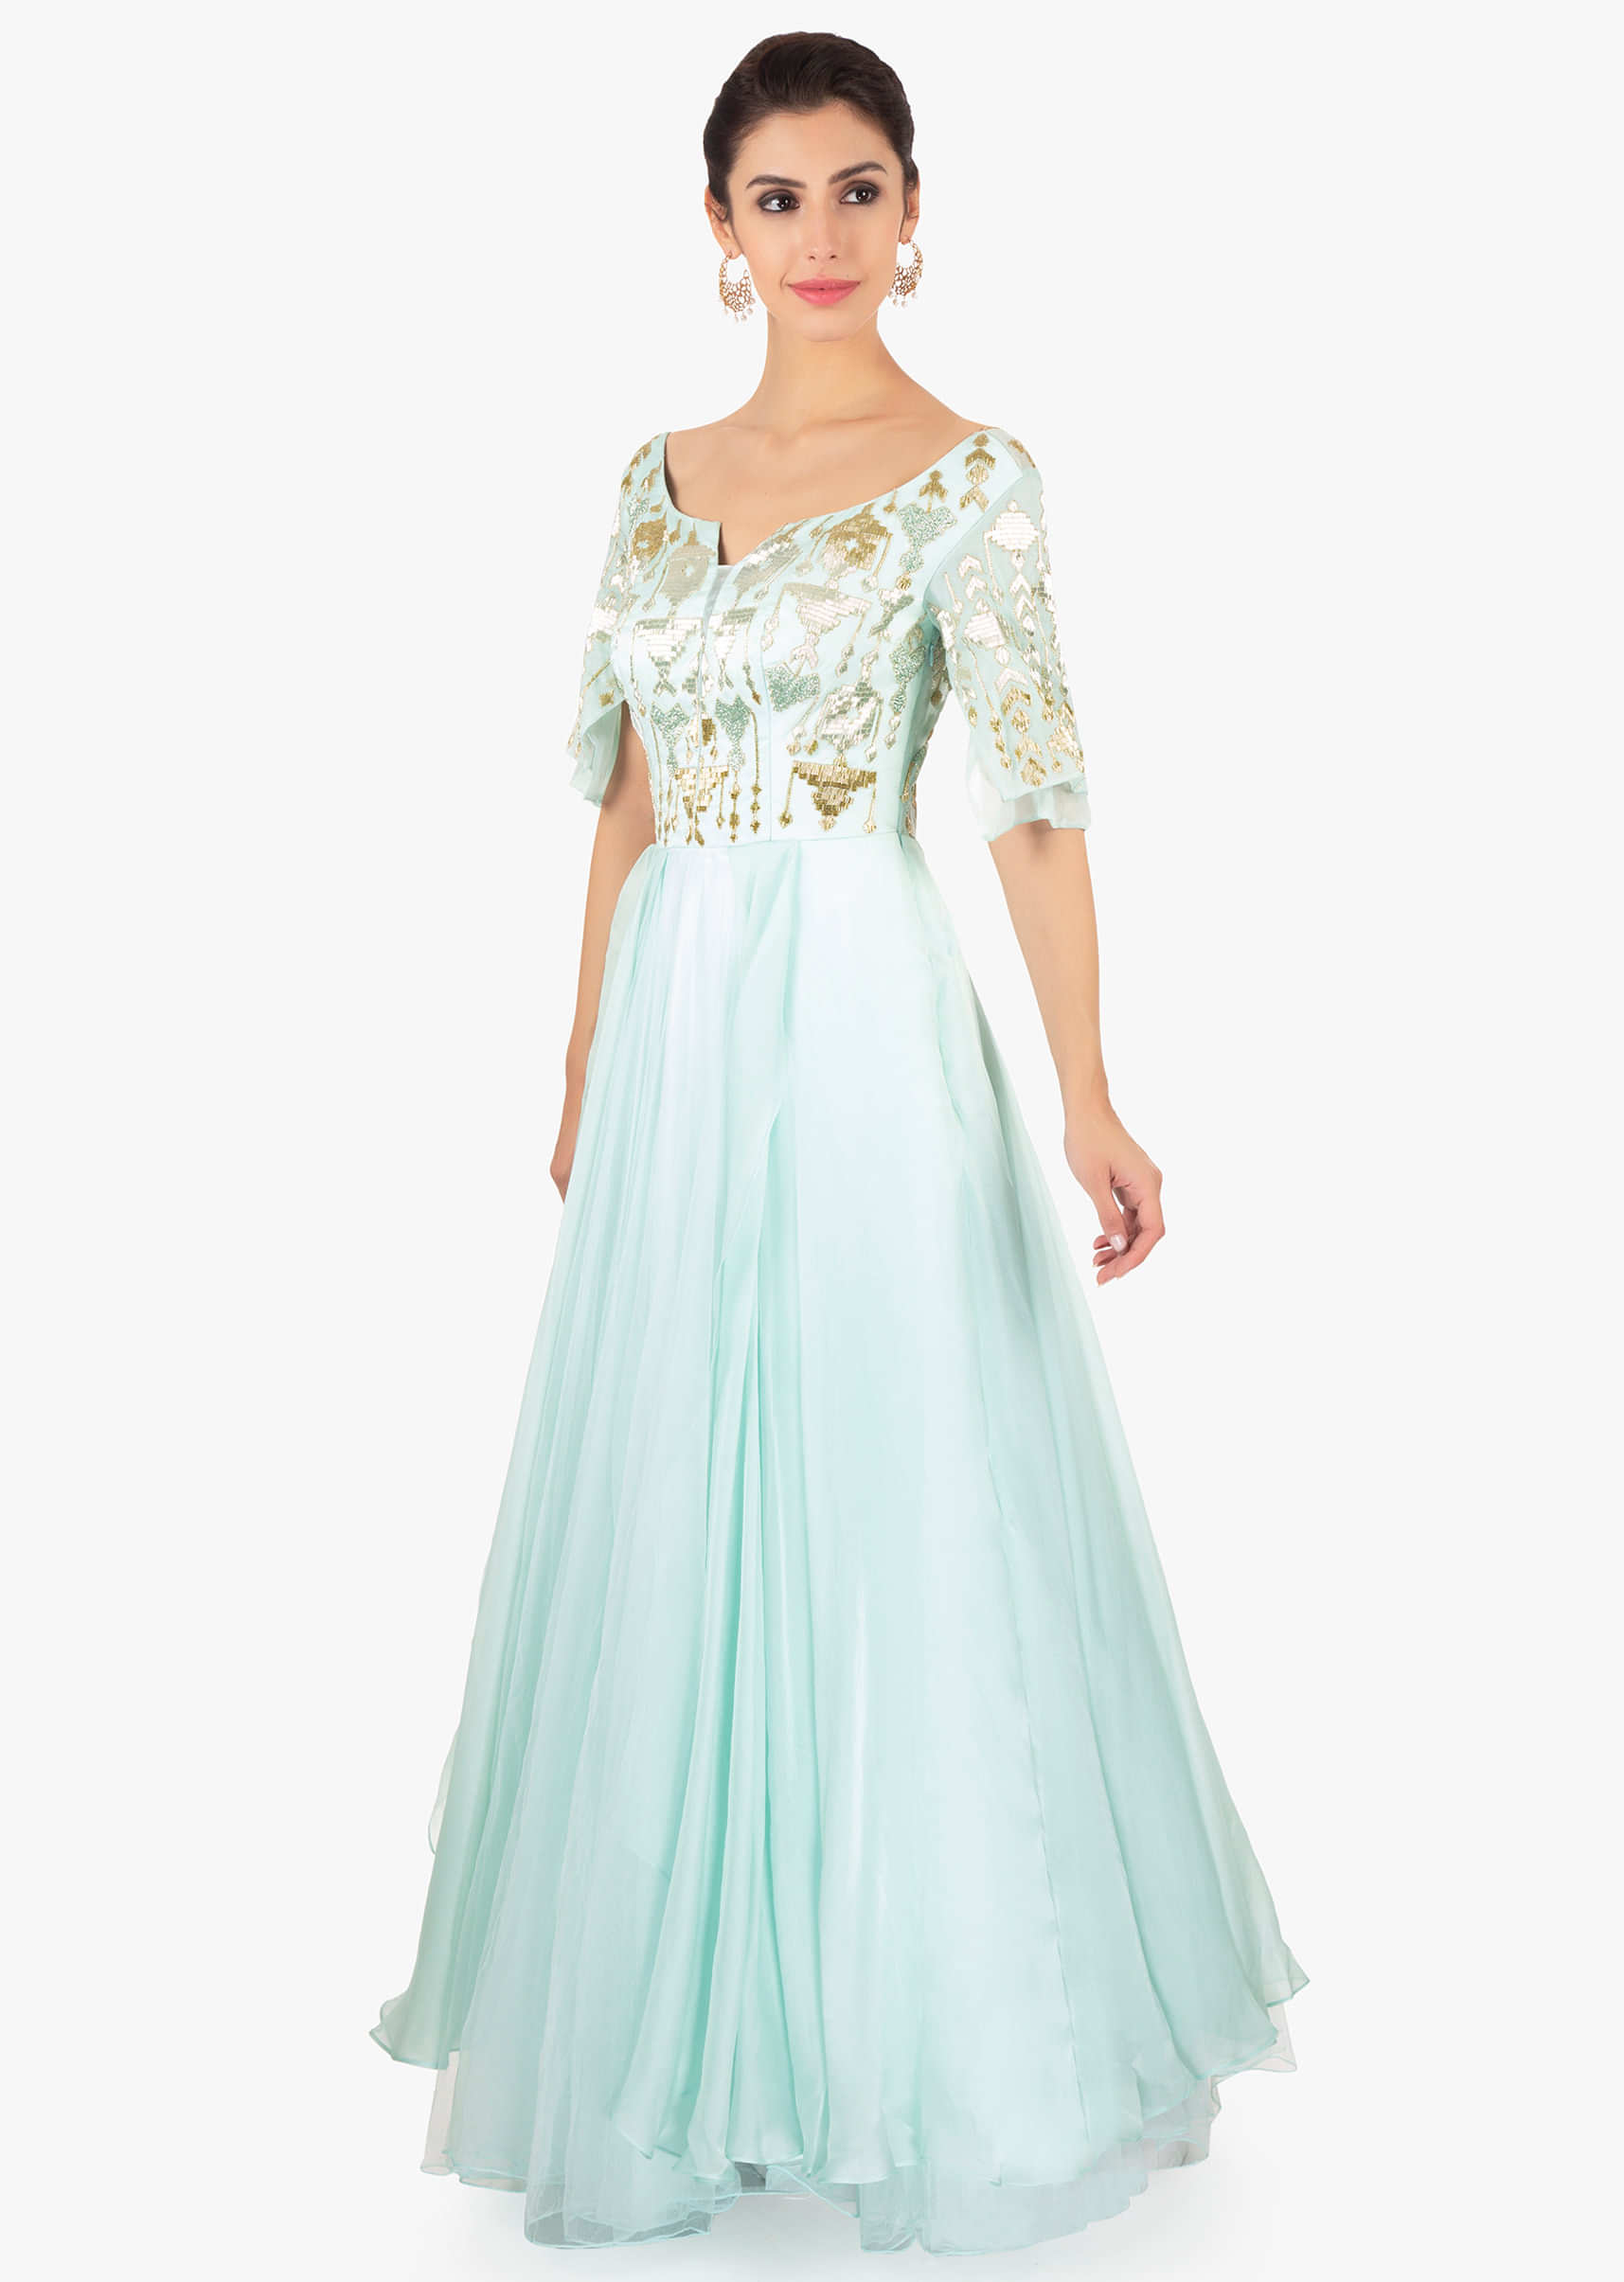 Buy Mint Green Gown Designed With Over Lapping Sleeves And Layers ...